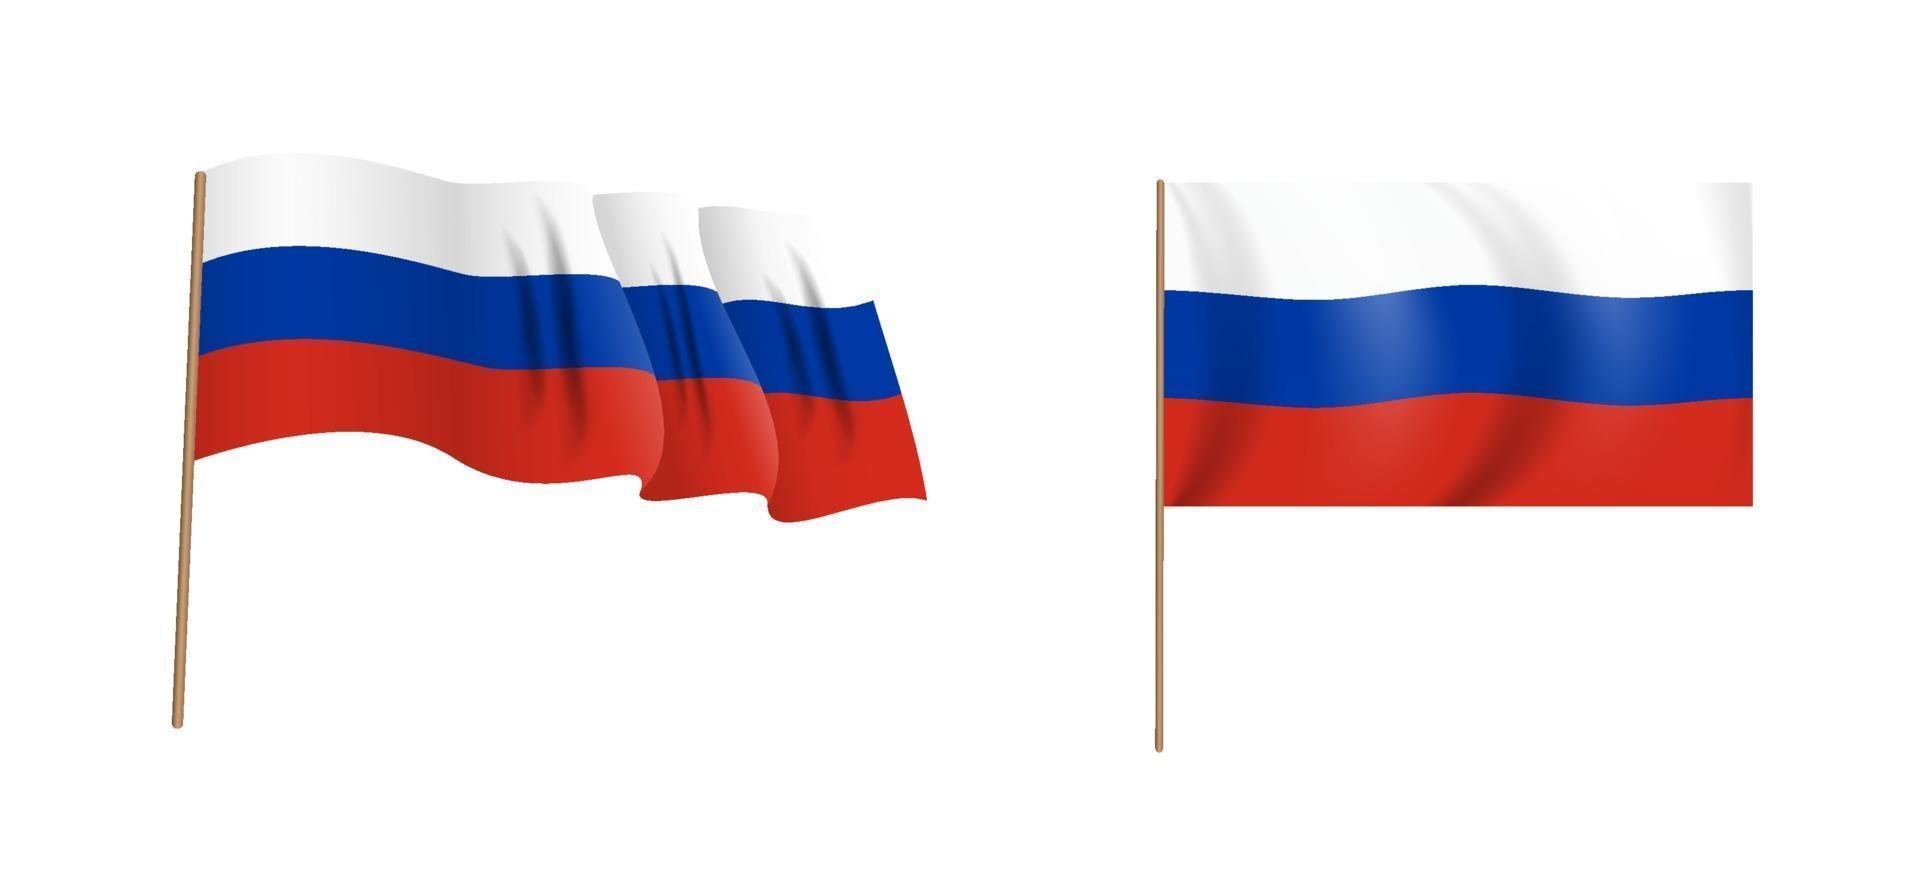 colorful naturalistic waving flag of the Russian Federation. vector